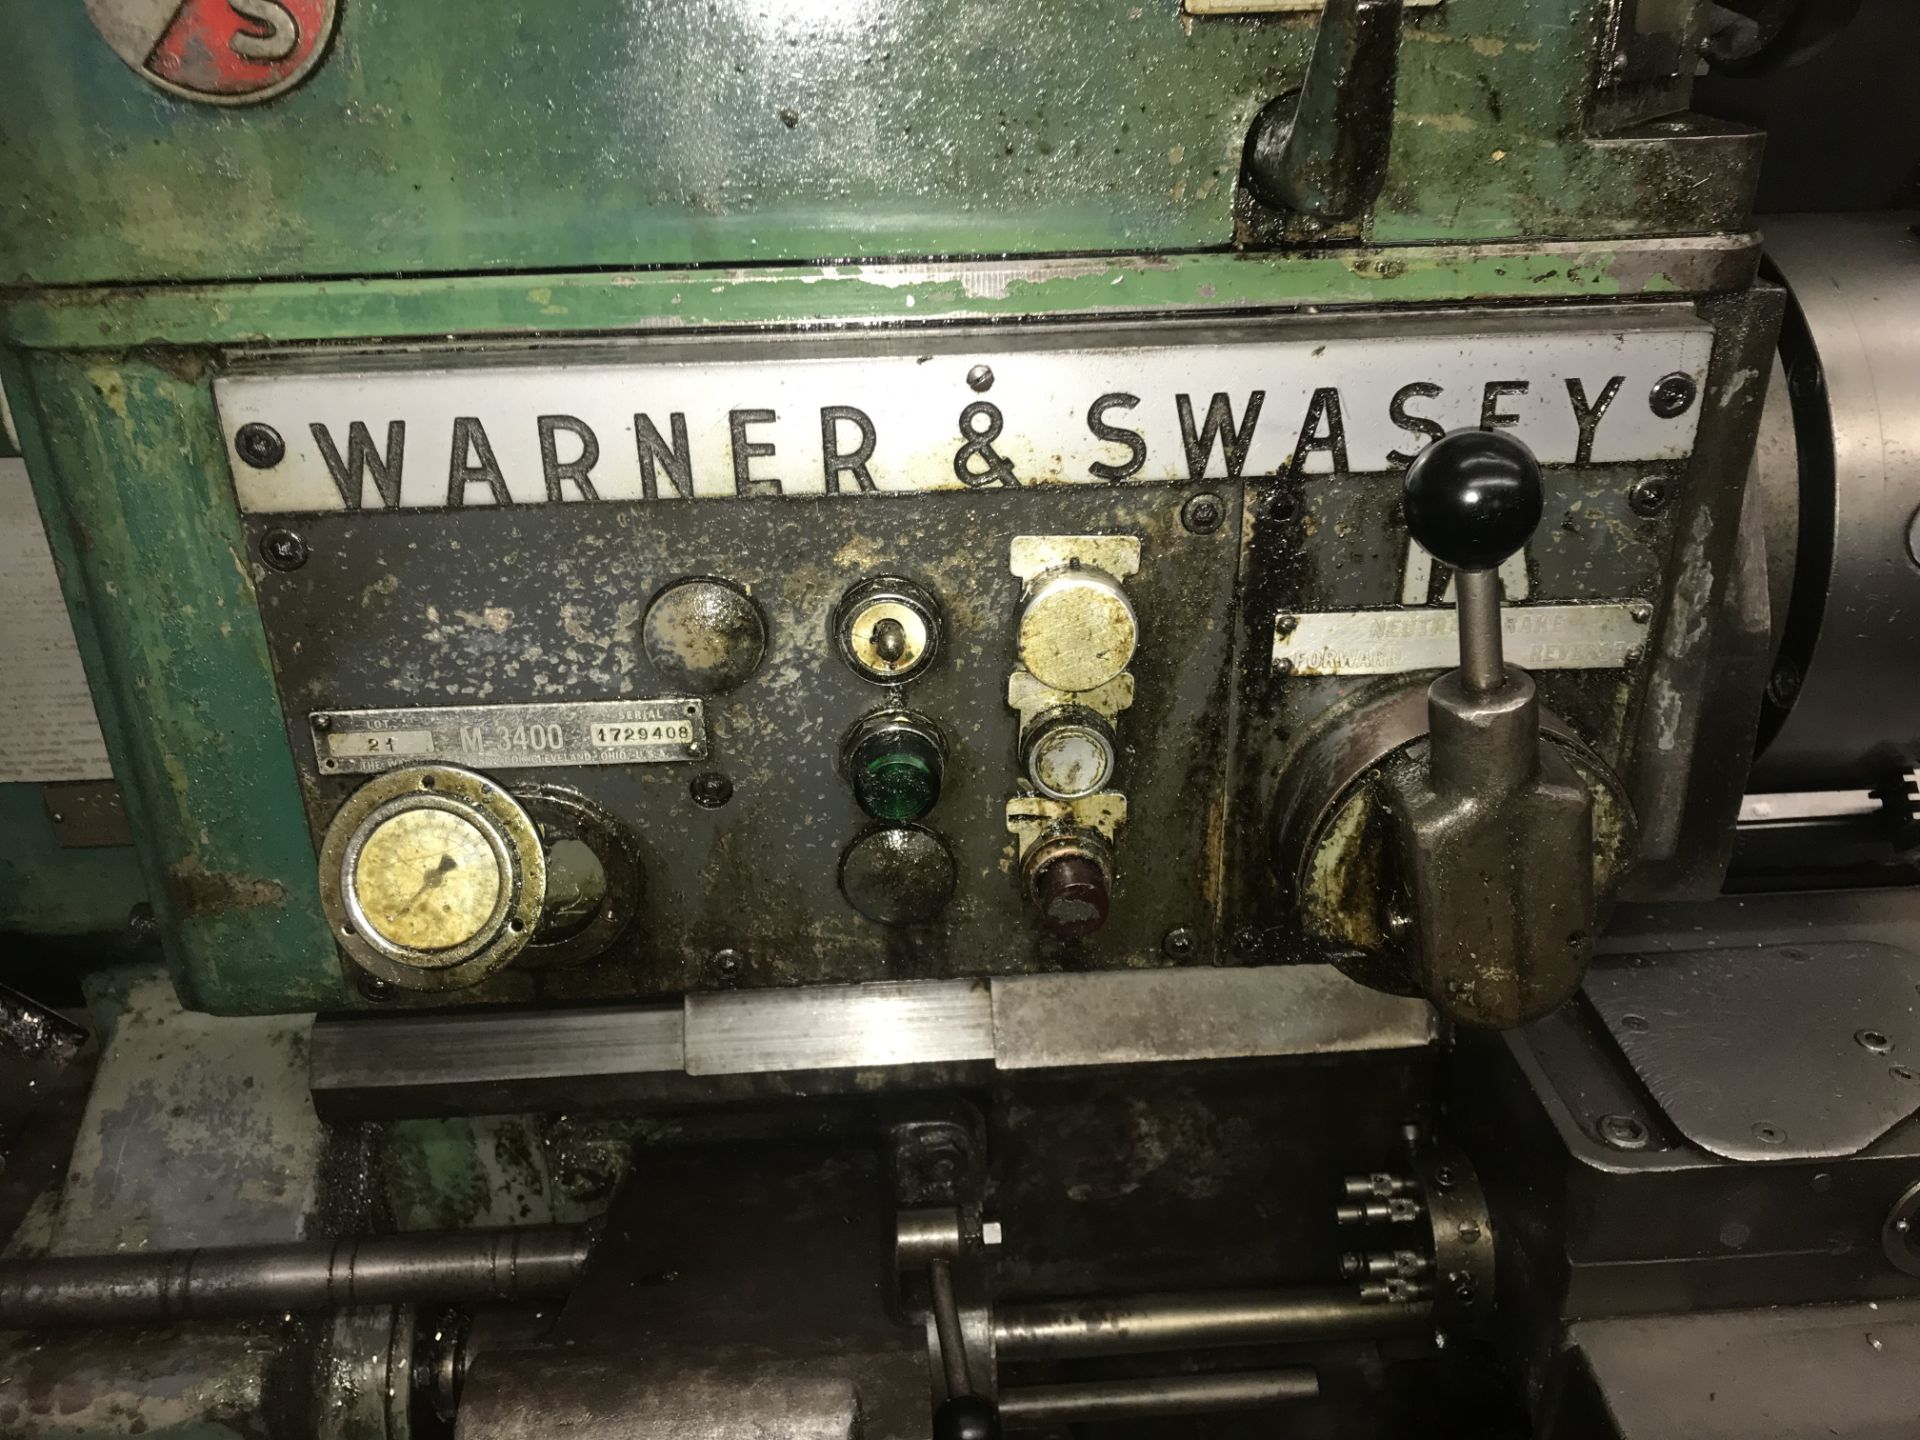 WARNER AND SWASEY HEXAGONAL TURRET LATHE, 15/30 DUAL HP, MODEL - M-3400, 12" 3 JAW CHUCK, - Image 3 of 5